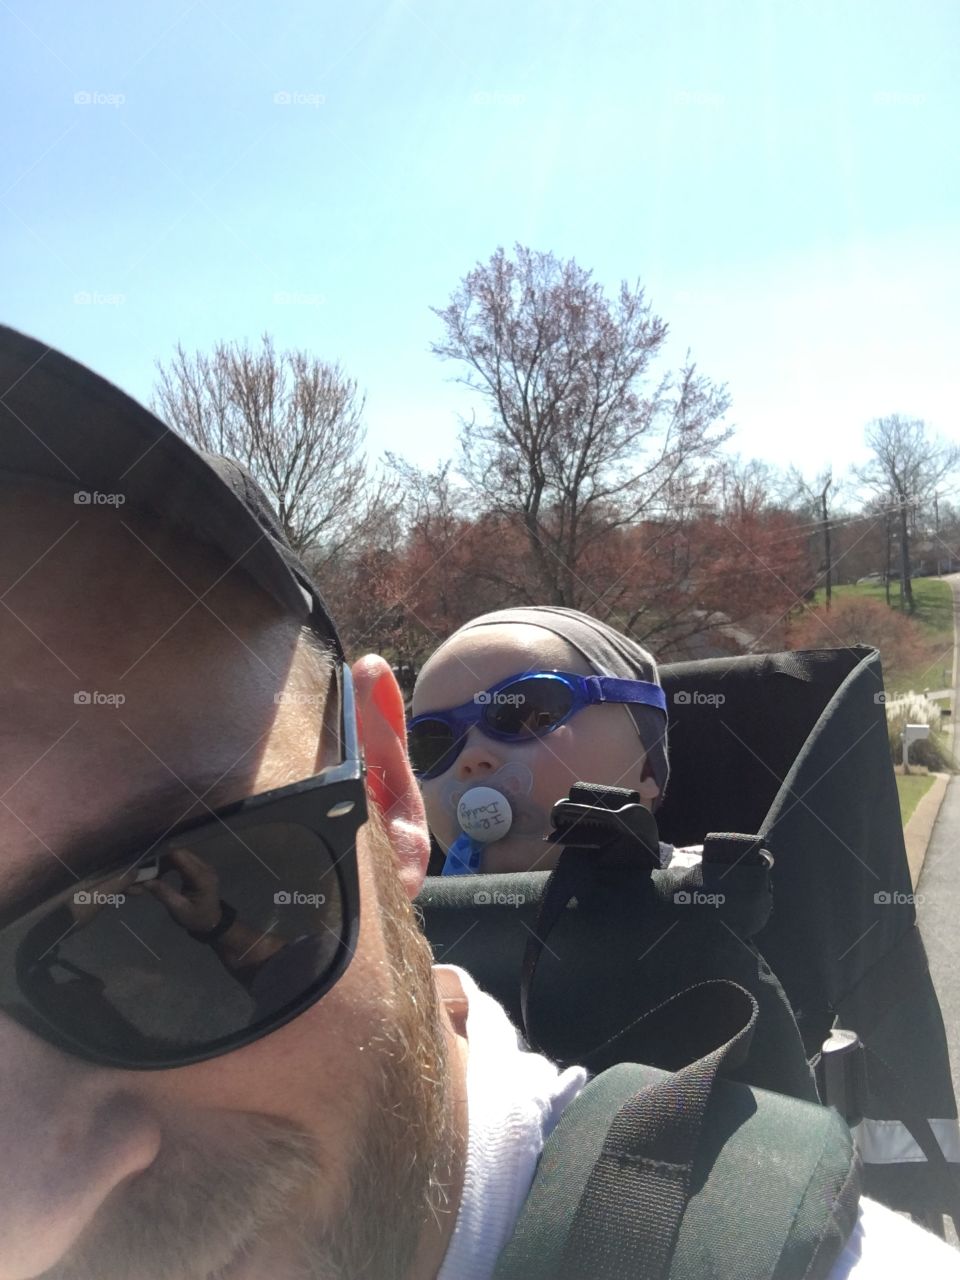 Dad walking with baby in carrier on his back